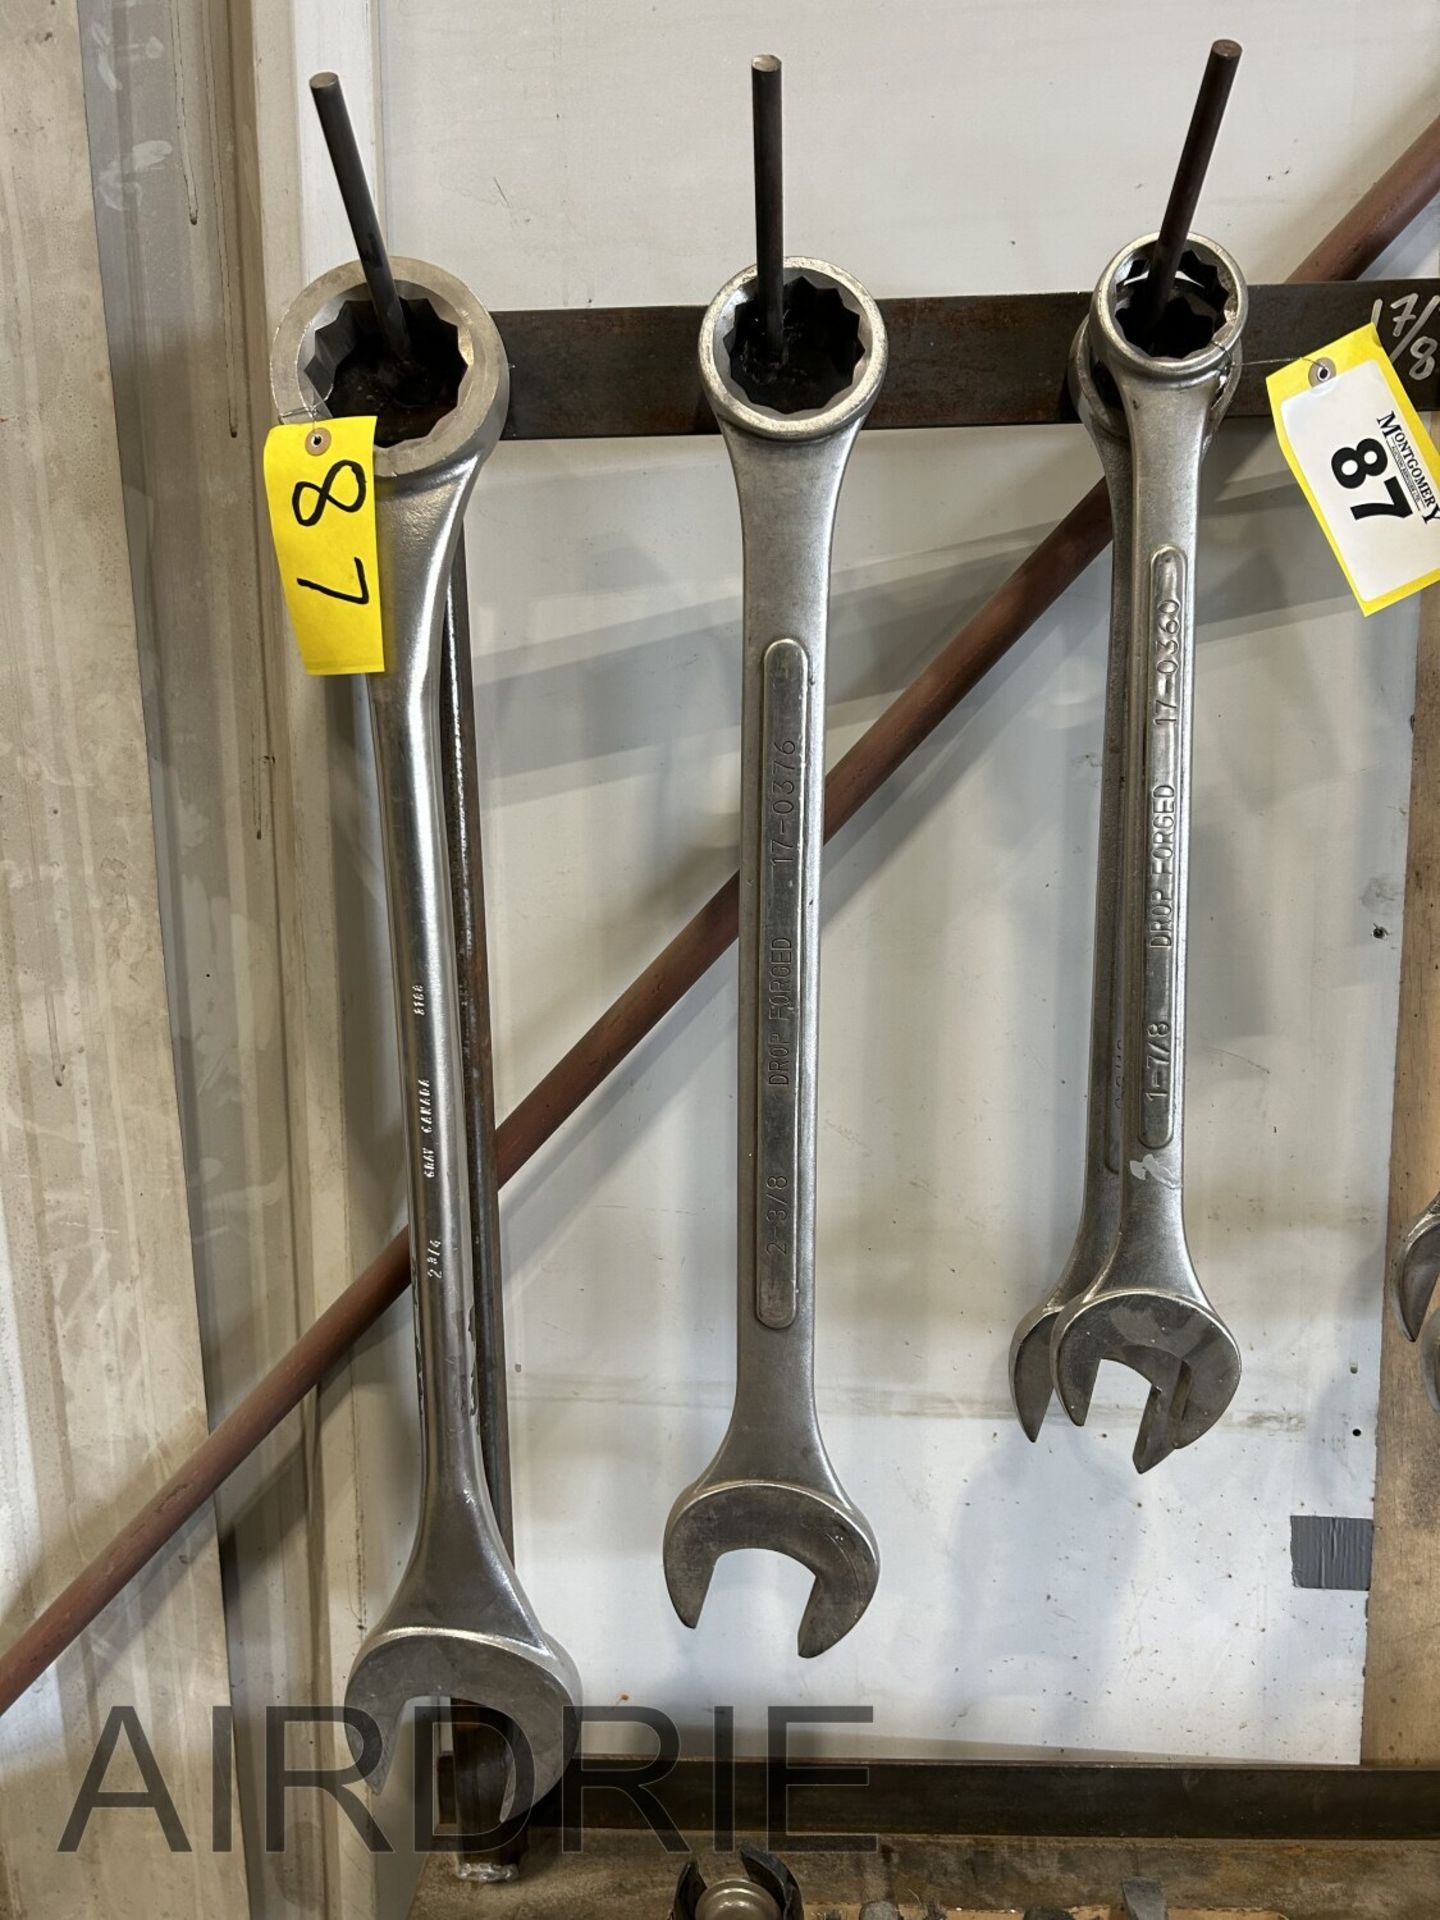 *OFFSITE* HD COMBINATION WRENCHES - 2-3-8", 2-3/8", 2-3/16", 1-7/8"